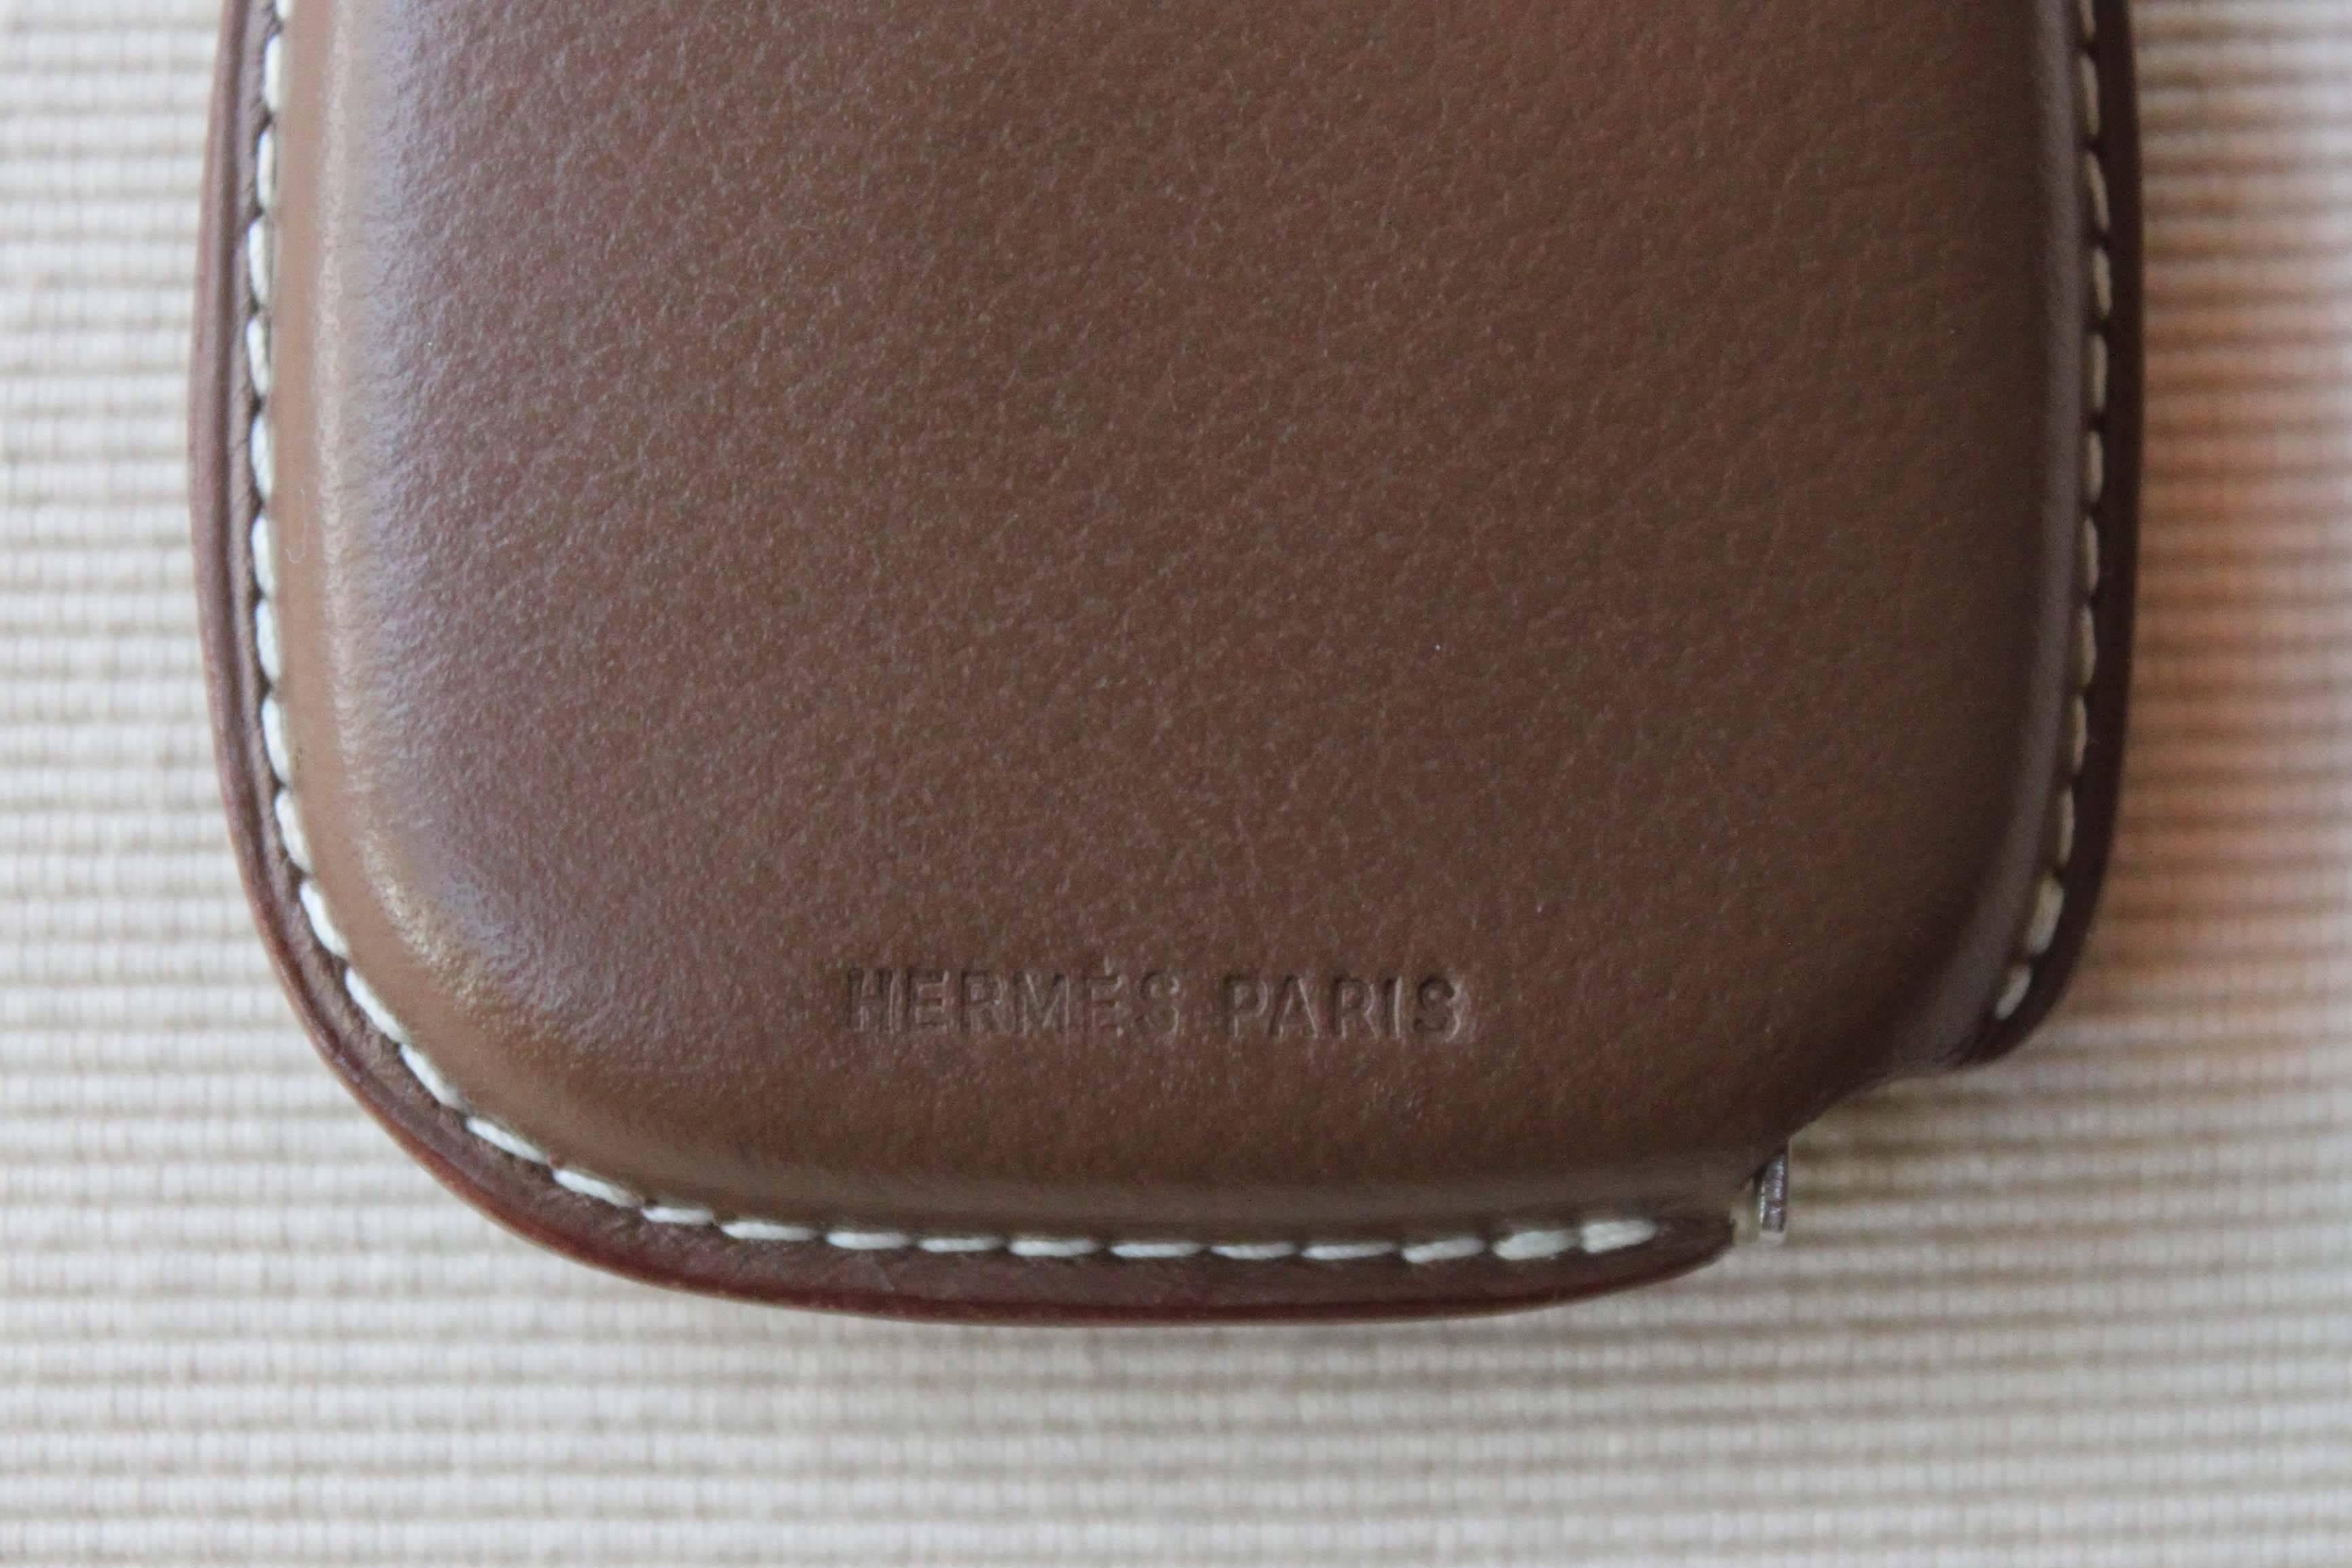 A vintage Hermès Leather encapsulated tape measure with white stitching. The tape is very thin, about 6 mm and extending to three metres, it slips easily into a jacket or pant pocket. A very sophisticated and stylish way to take measurements.